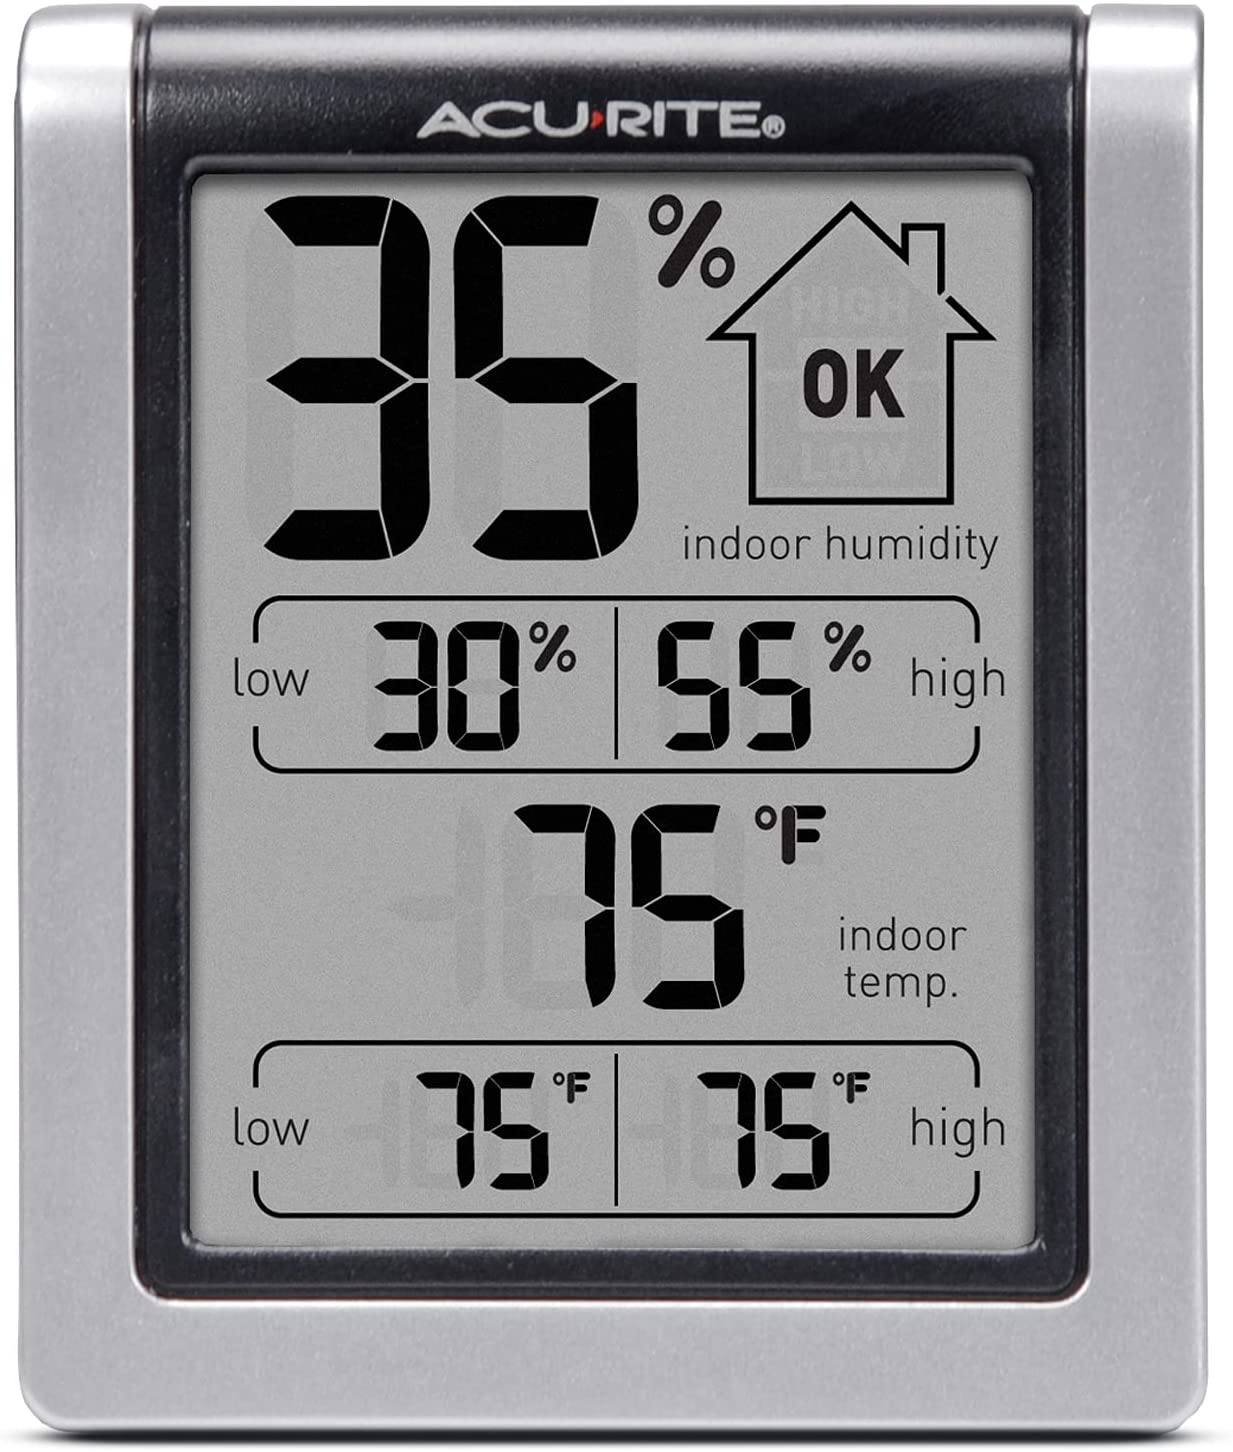 AcuRite 00613 Digital Hygrometer & Indoor Thermometer Pre-Calibrated Humidity Gauge, 3" H x 2.5" W x 1.3" D, Black